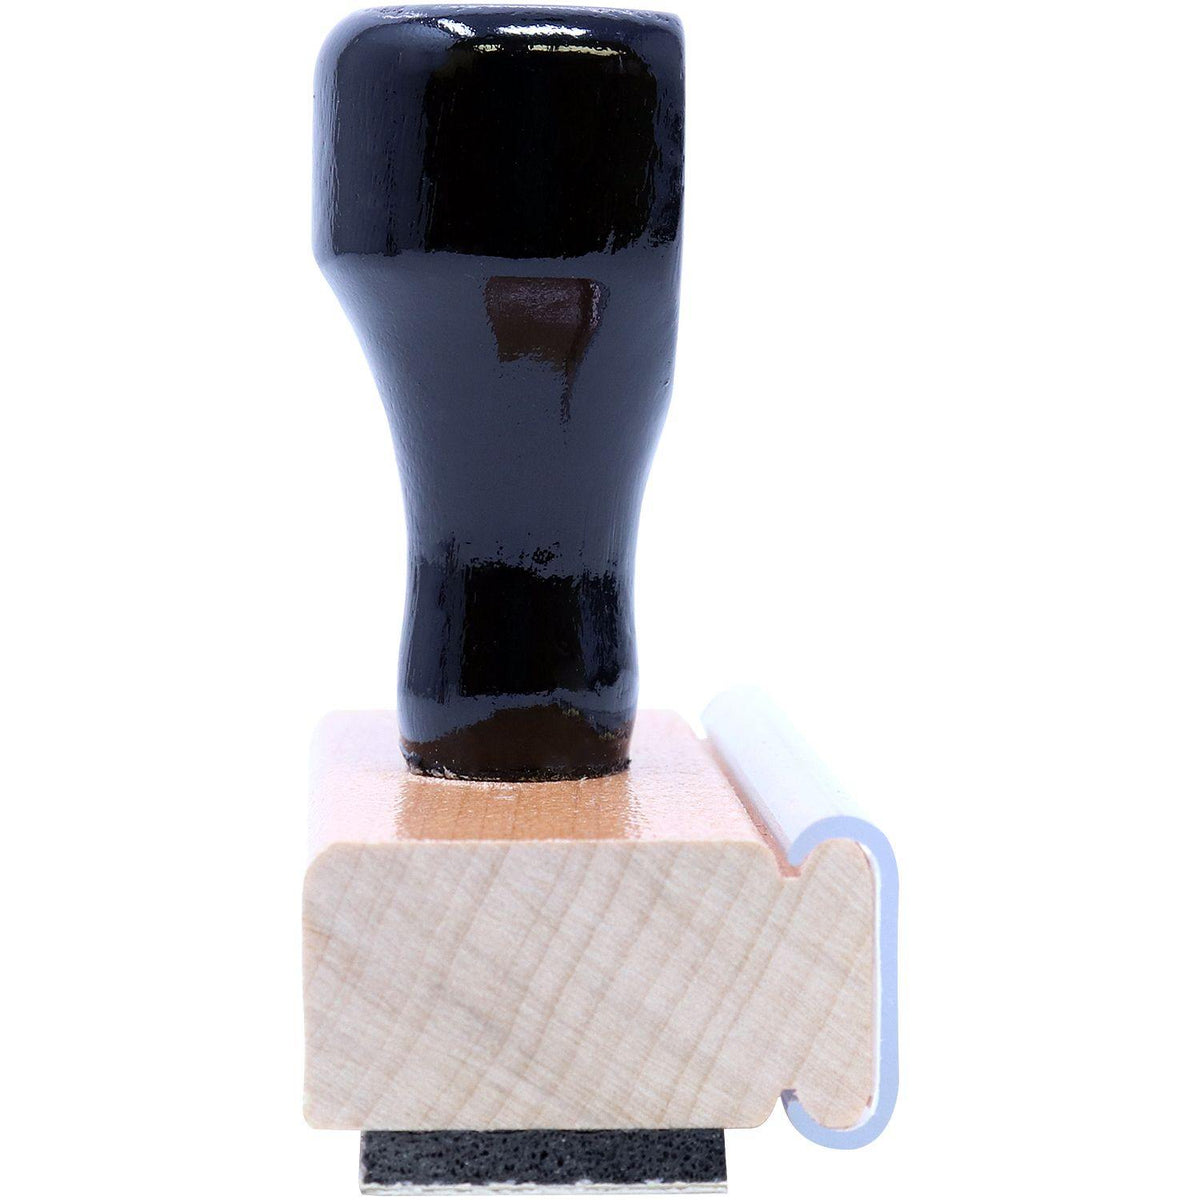 Side View of Large Classified Rubber Stamp